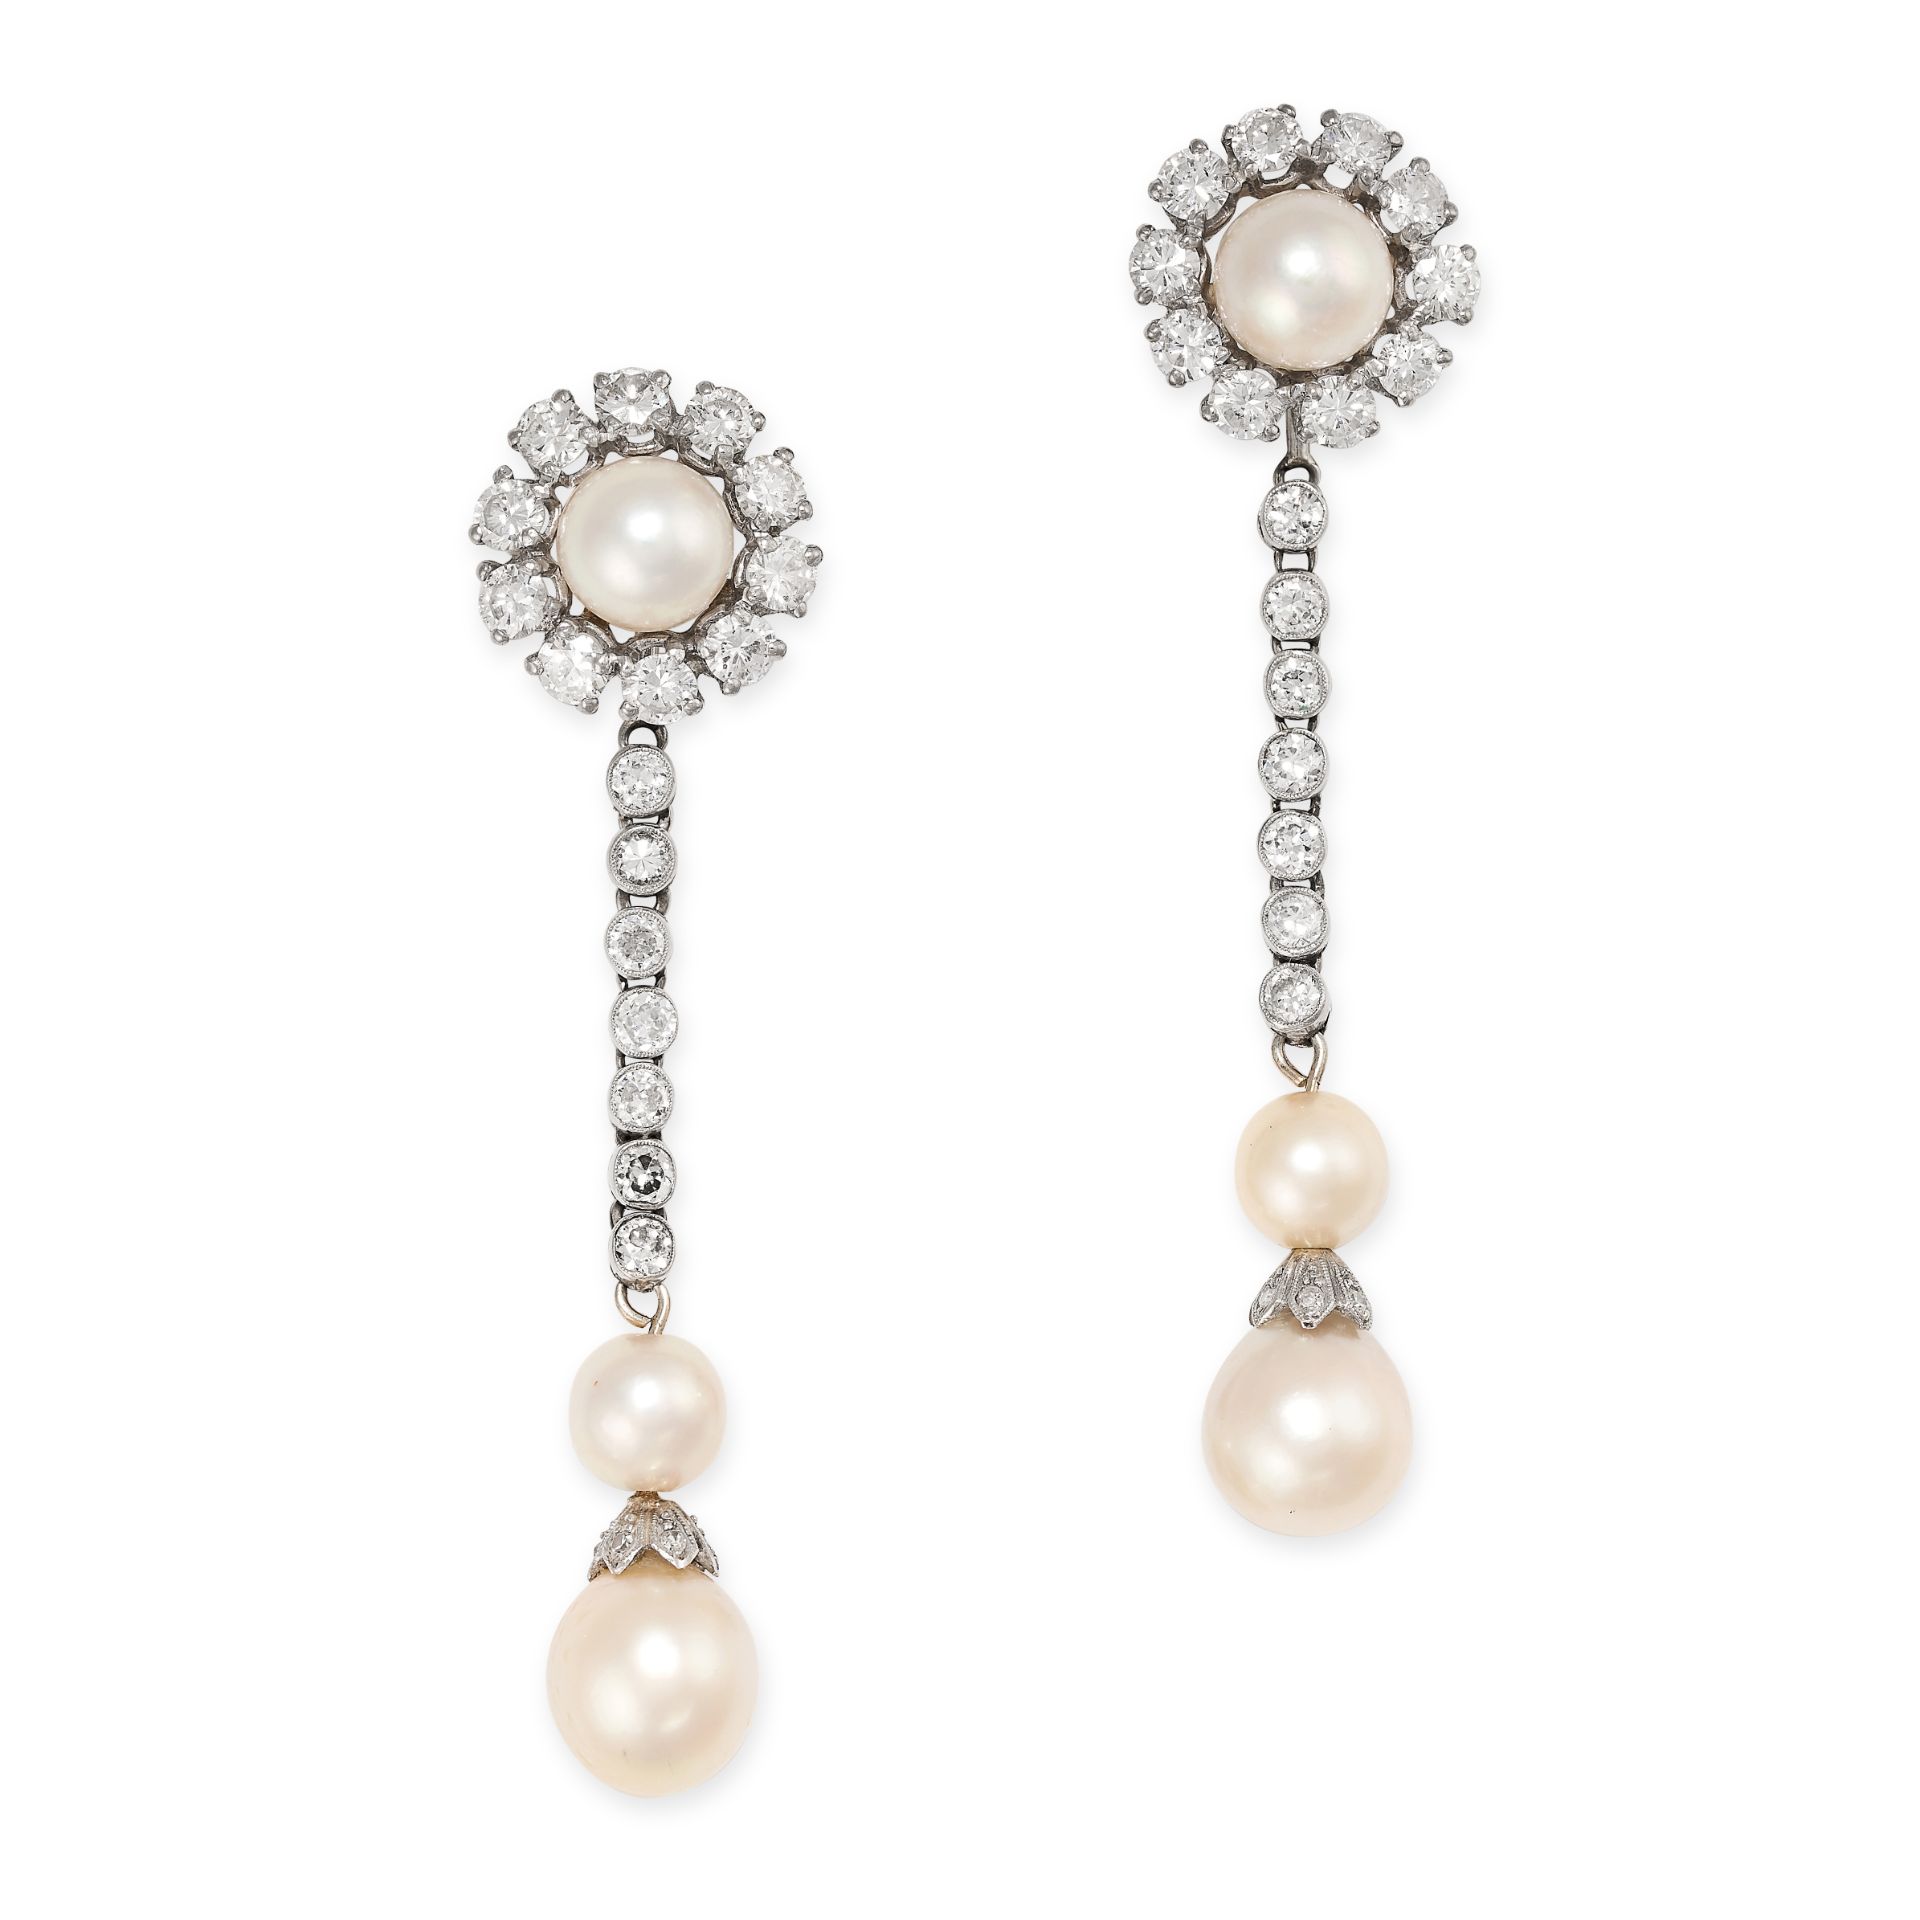 A PAIR OF DIAMOND AND PEARL DROP EARRINGS each set with a pearl within a border of round brilliant